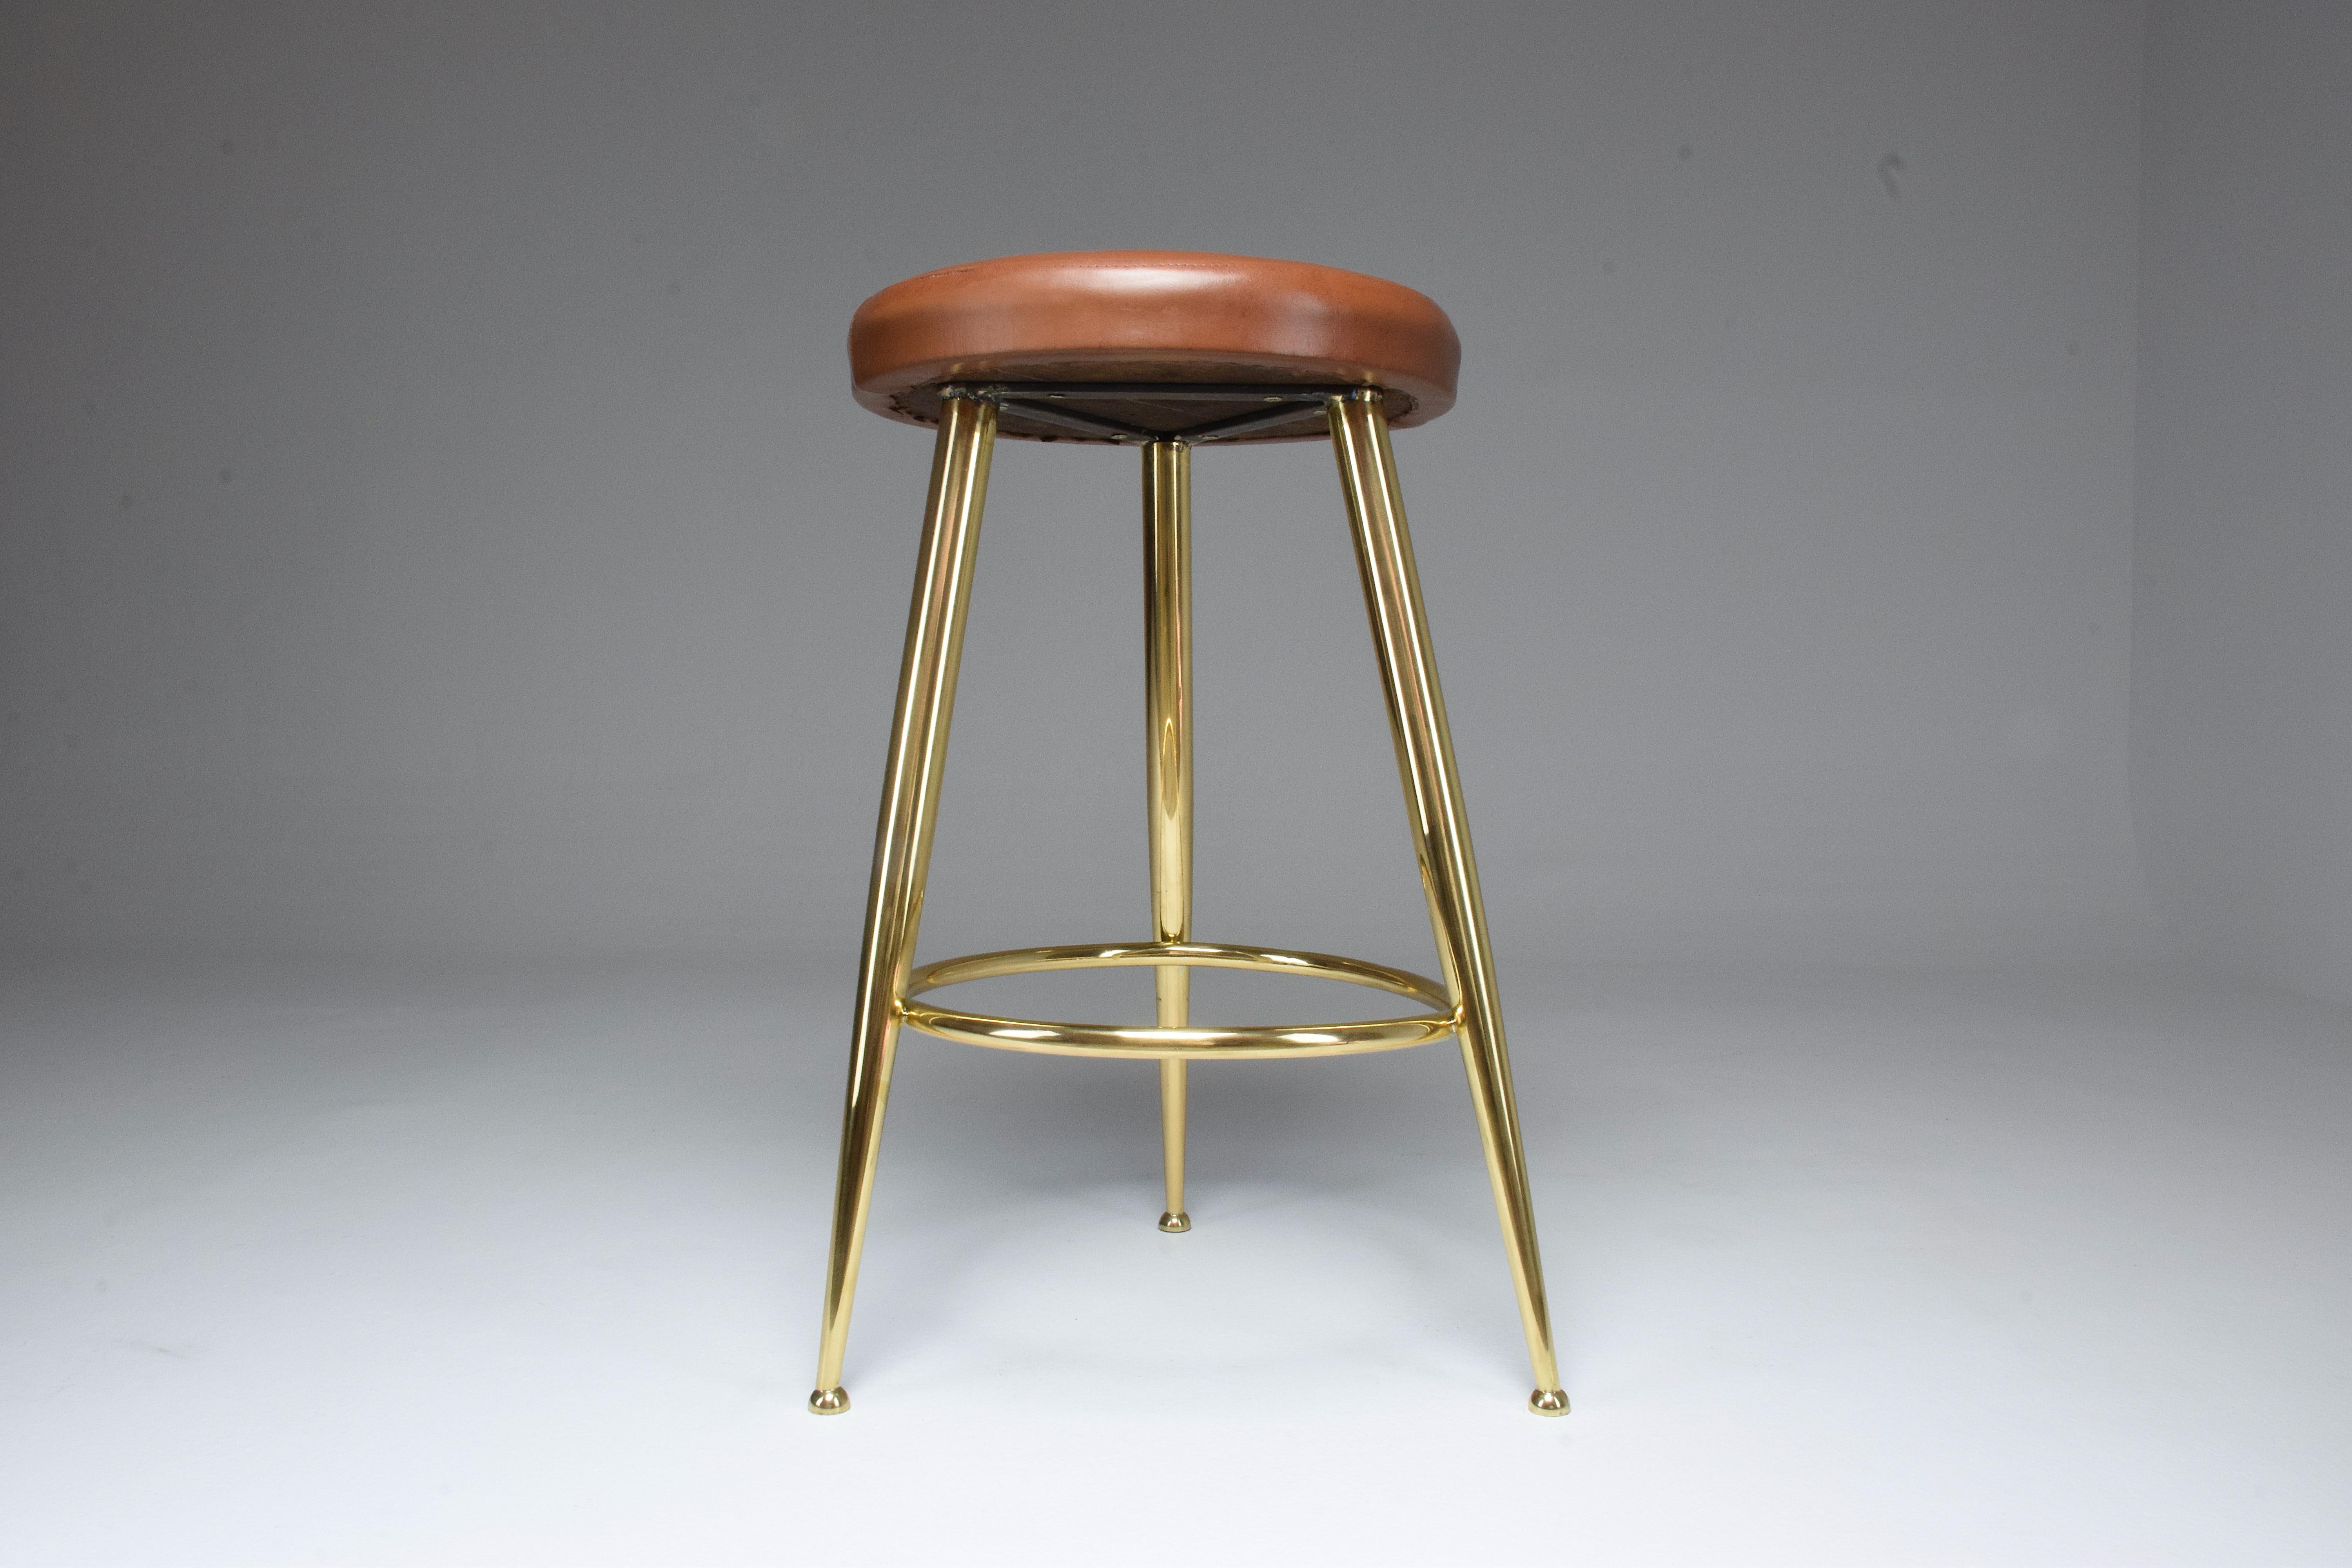 A 20th century vintage stool designed by Italian master Ico Parisi in the 1950s. This piece is highlighted by its solid gold polished brass structure with splayed and tempered legs, which has been re-finished at our atelier, and original light brown